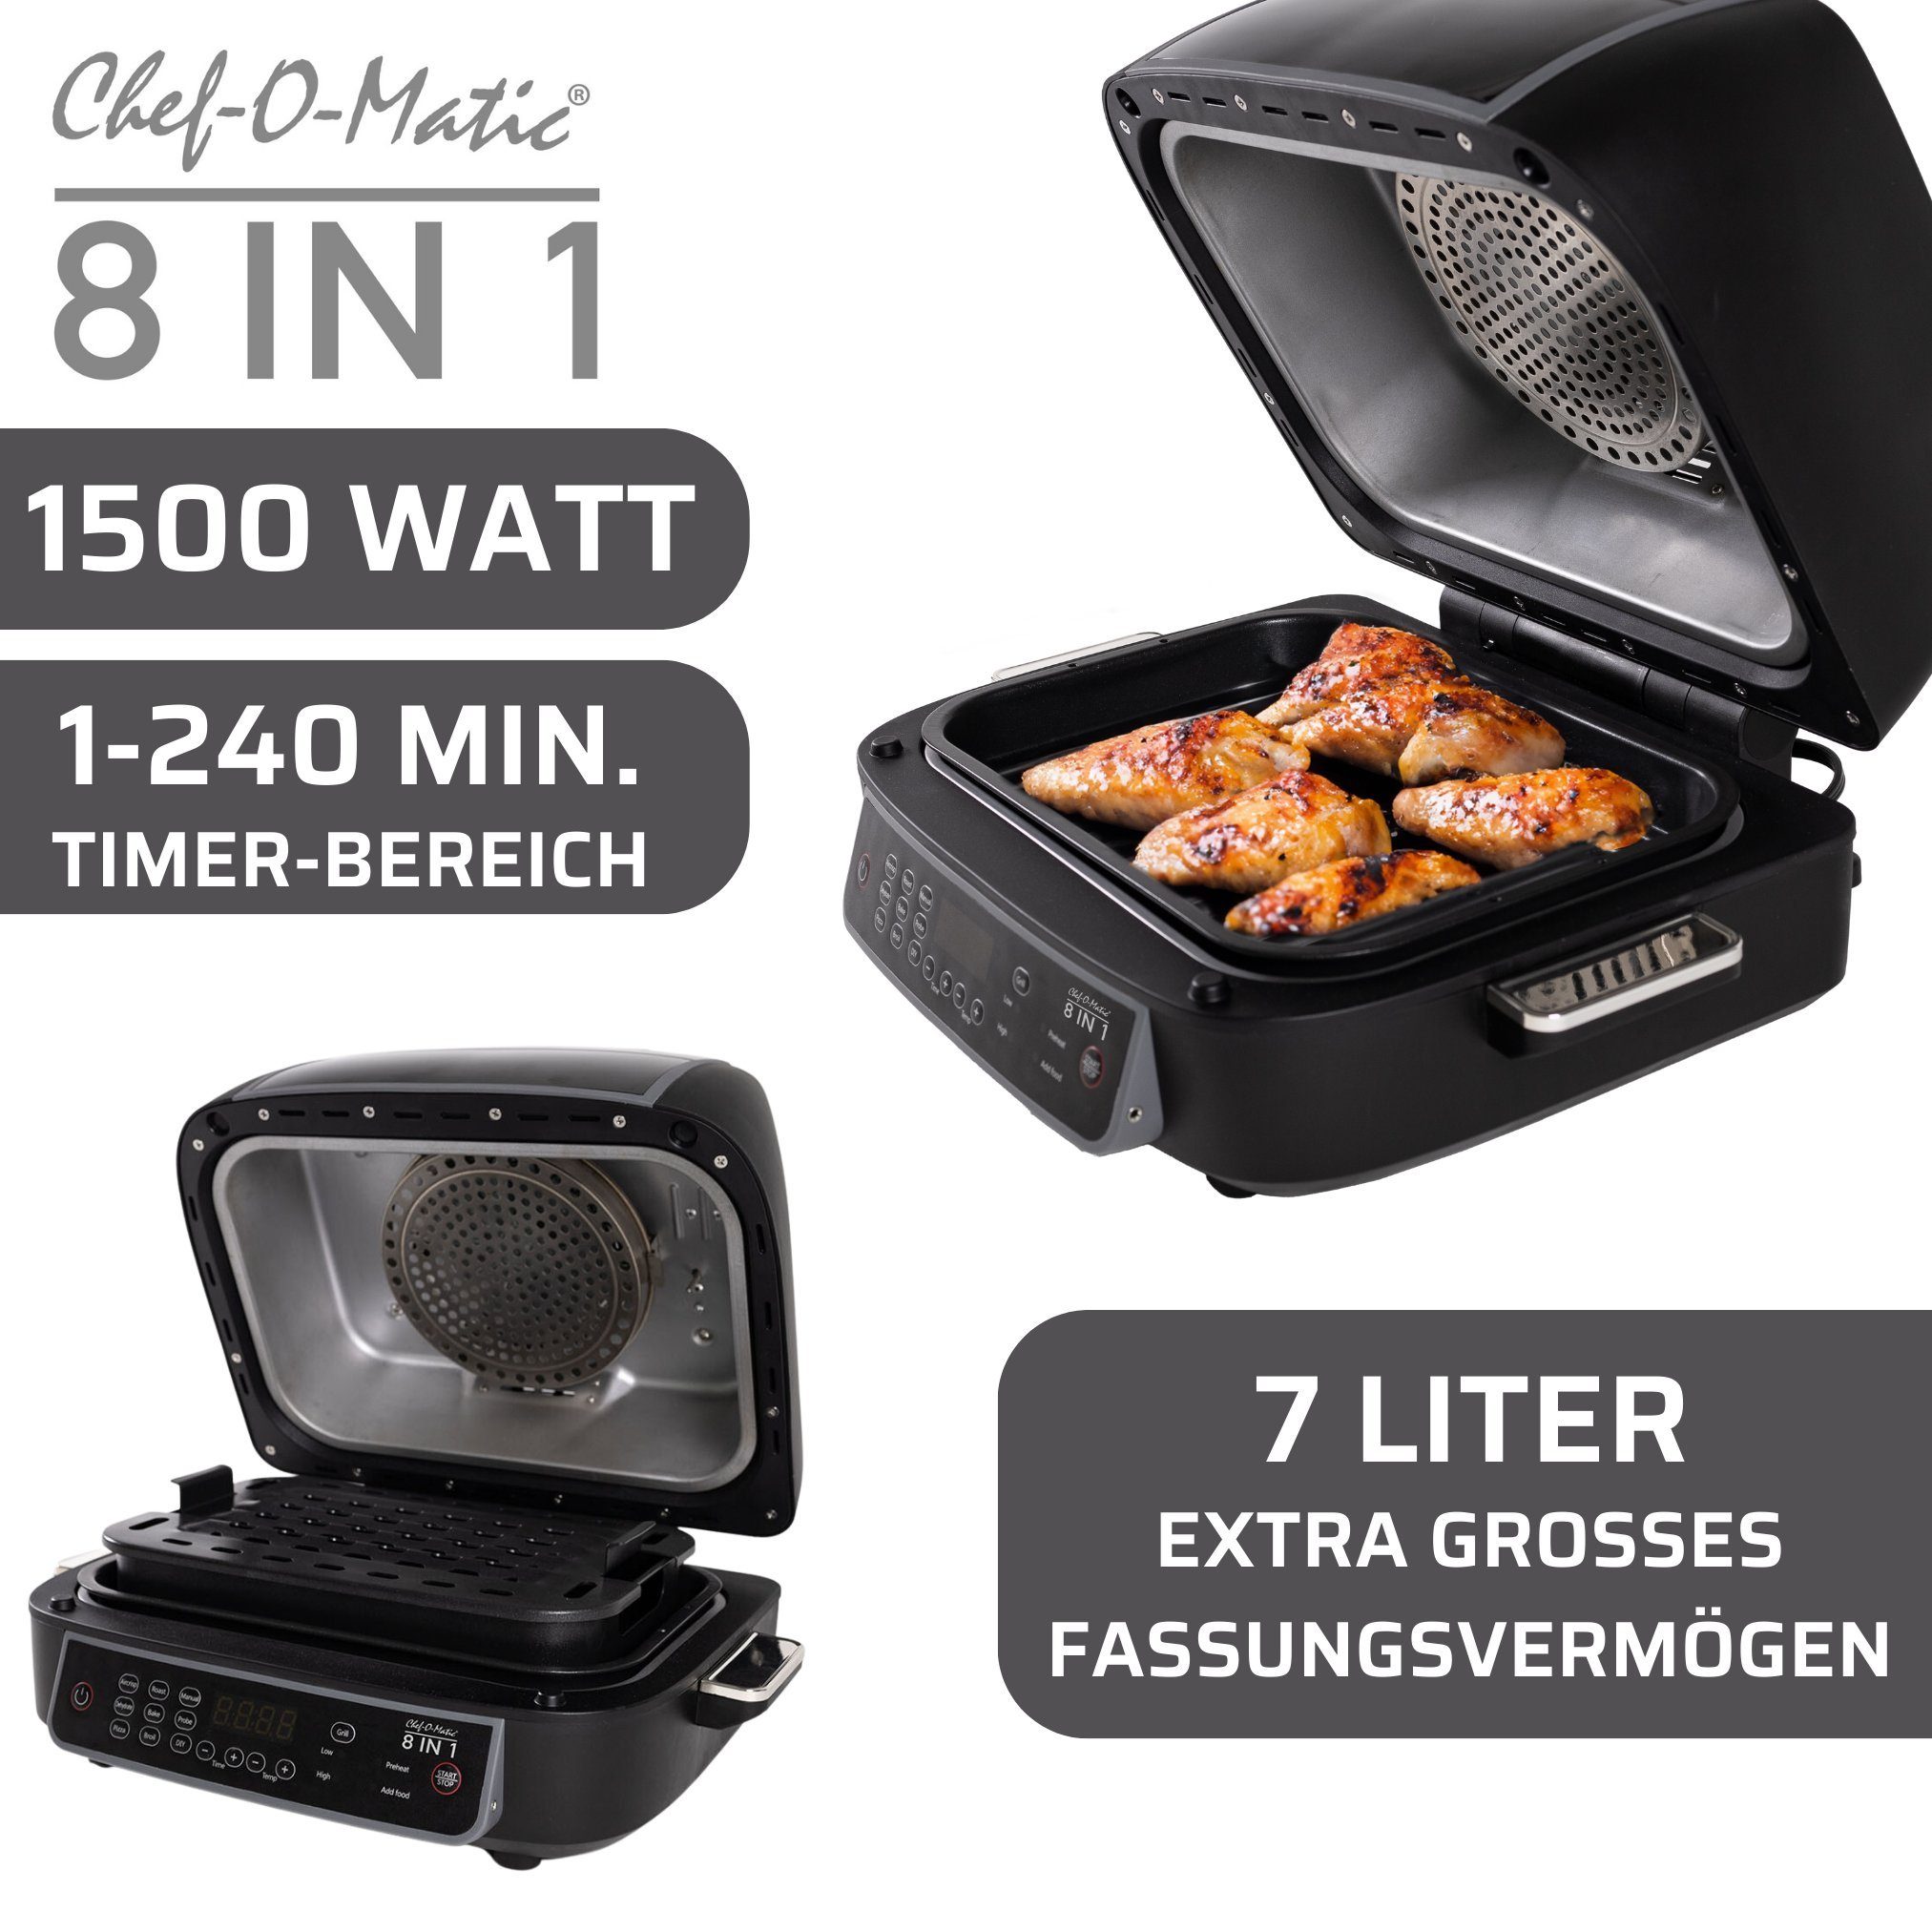 Best Indoor 1 Direct® Grill 1500,00 & Heißluftfritteuse Heißluftofen, Multikocher, Backofen, Air W, Fritteuse, Mini Ofen in 8 Grill, Chef-O-Matic®